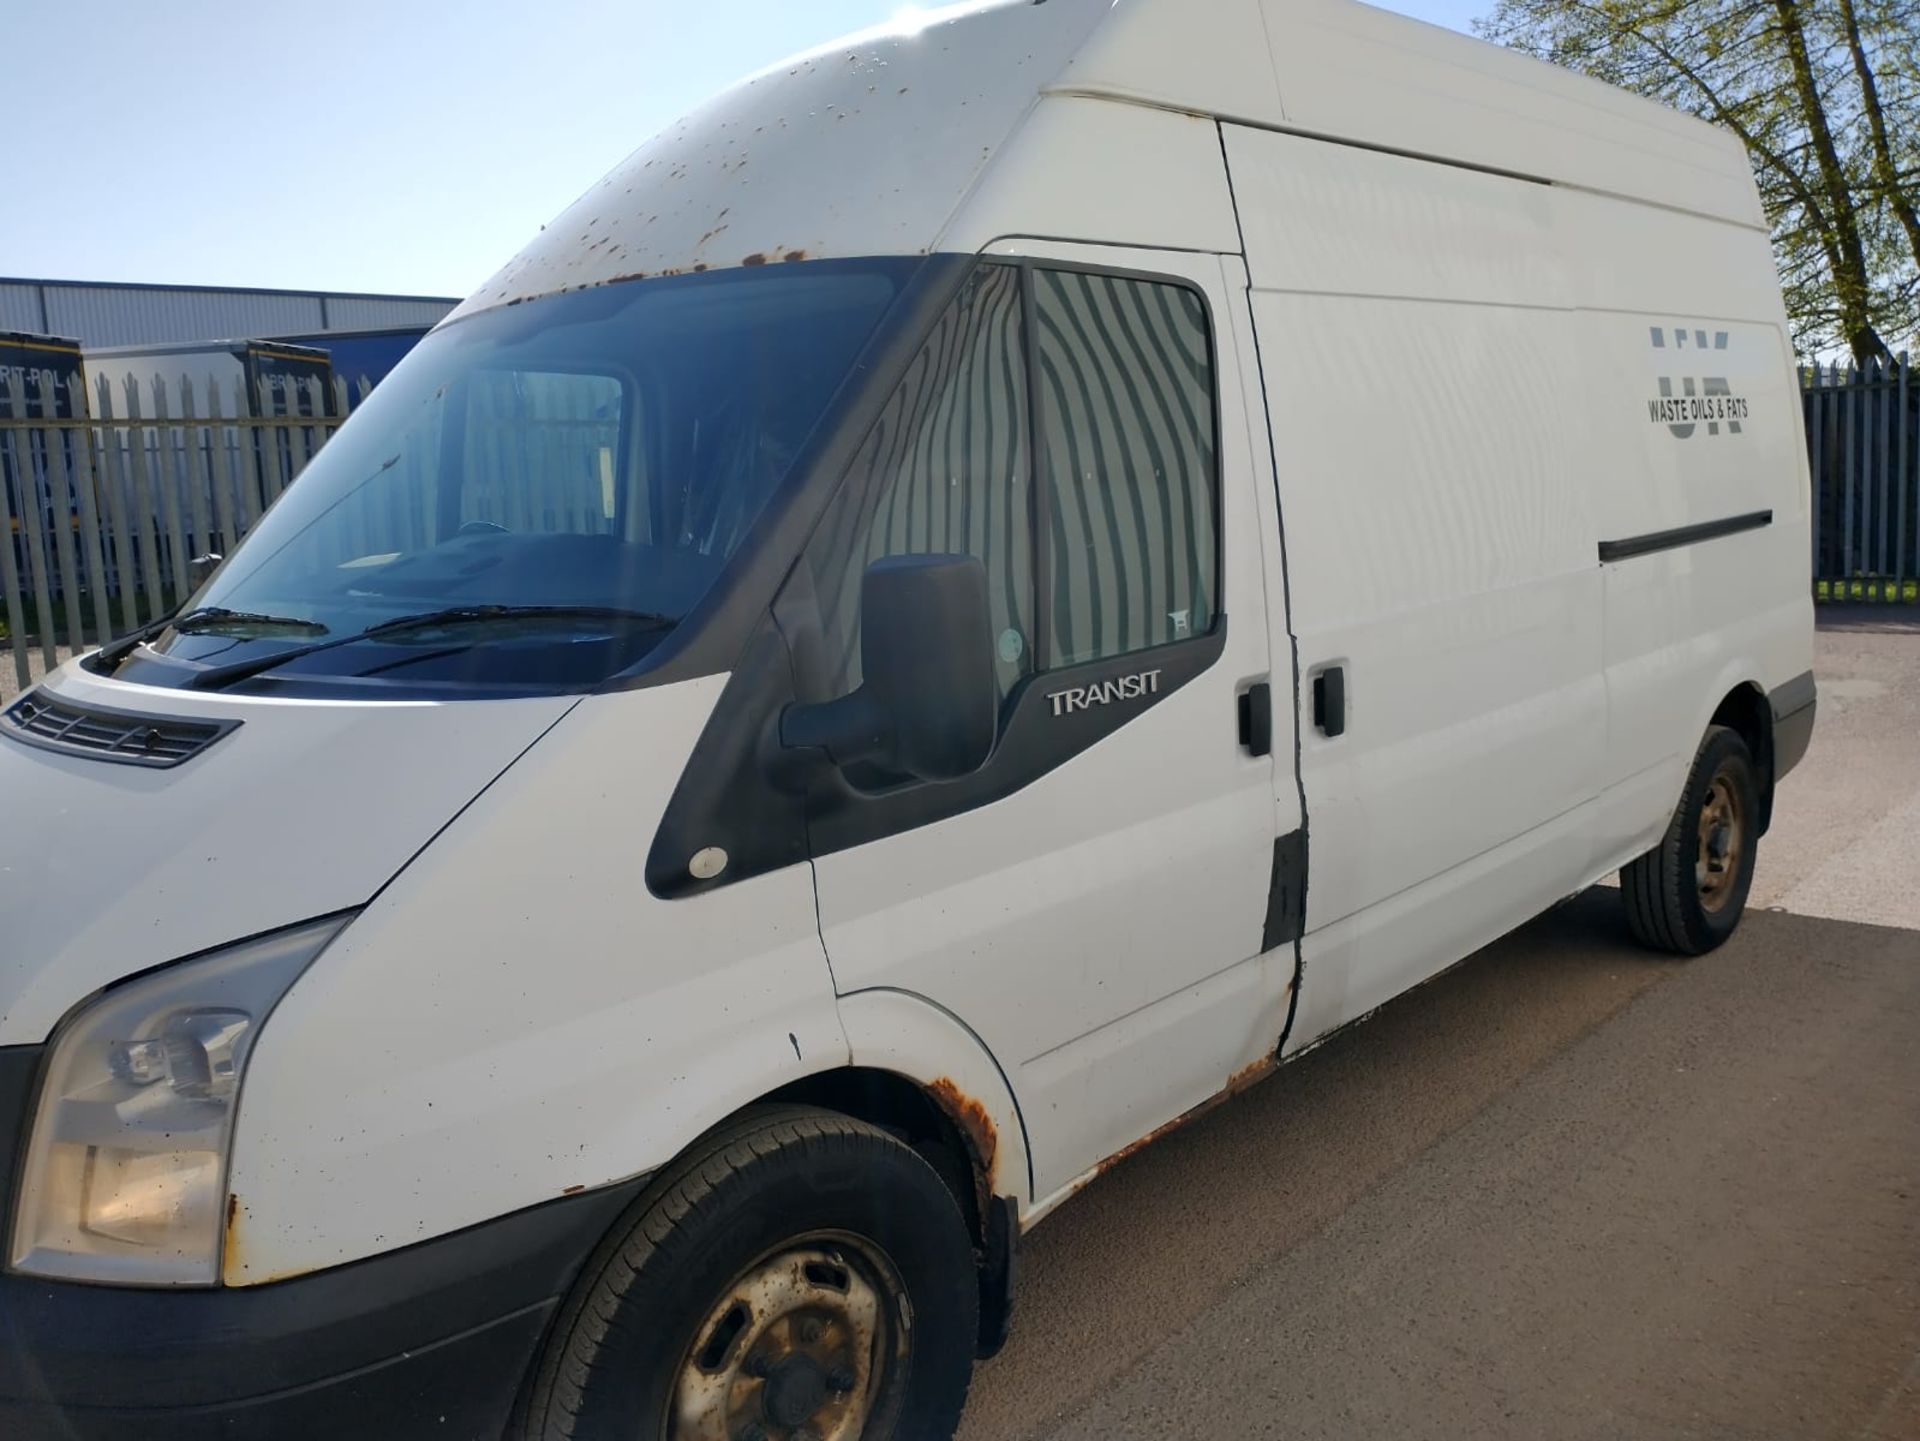 2012 Ford Transit Panel Van 2.2 5dr Medium Roof Panel Van - CL505 - Location: Corby - Image 10 of 13